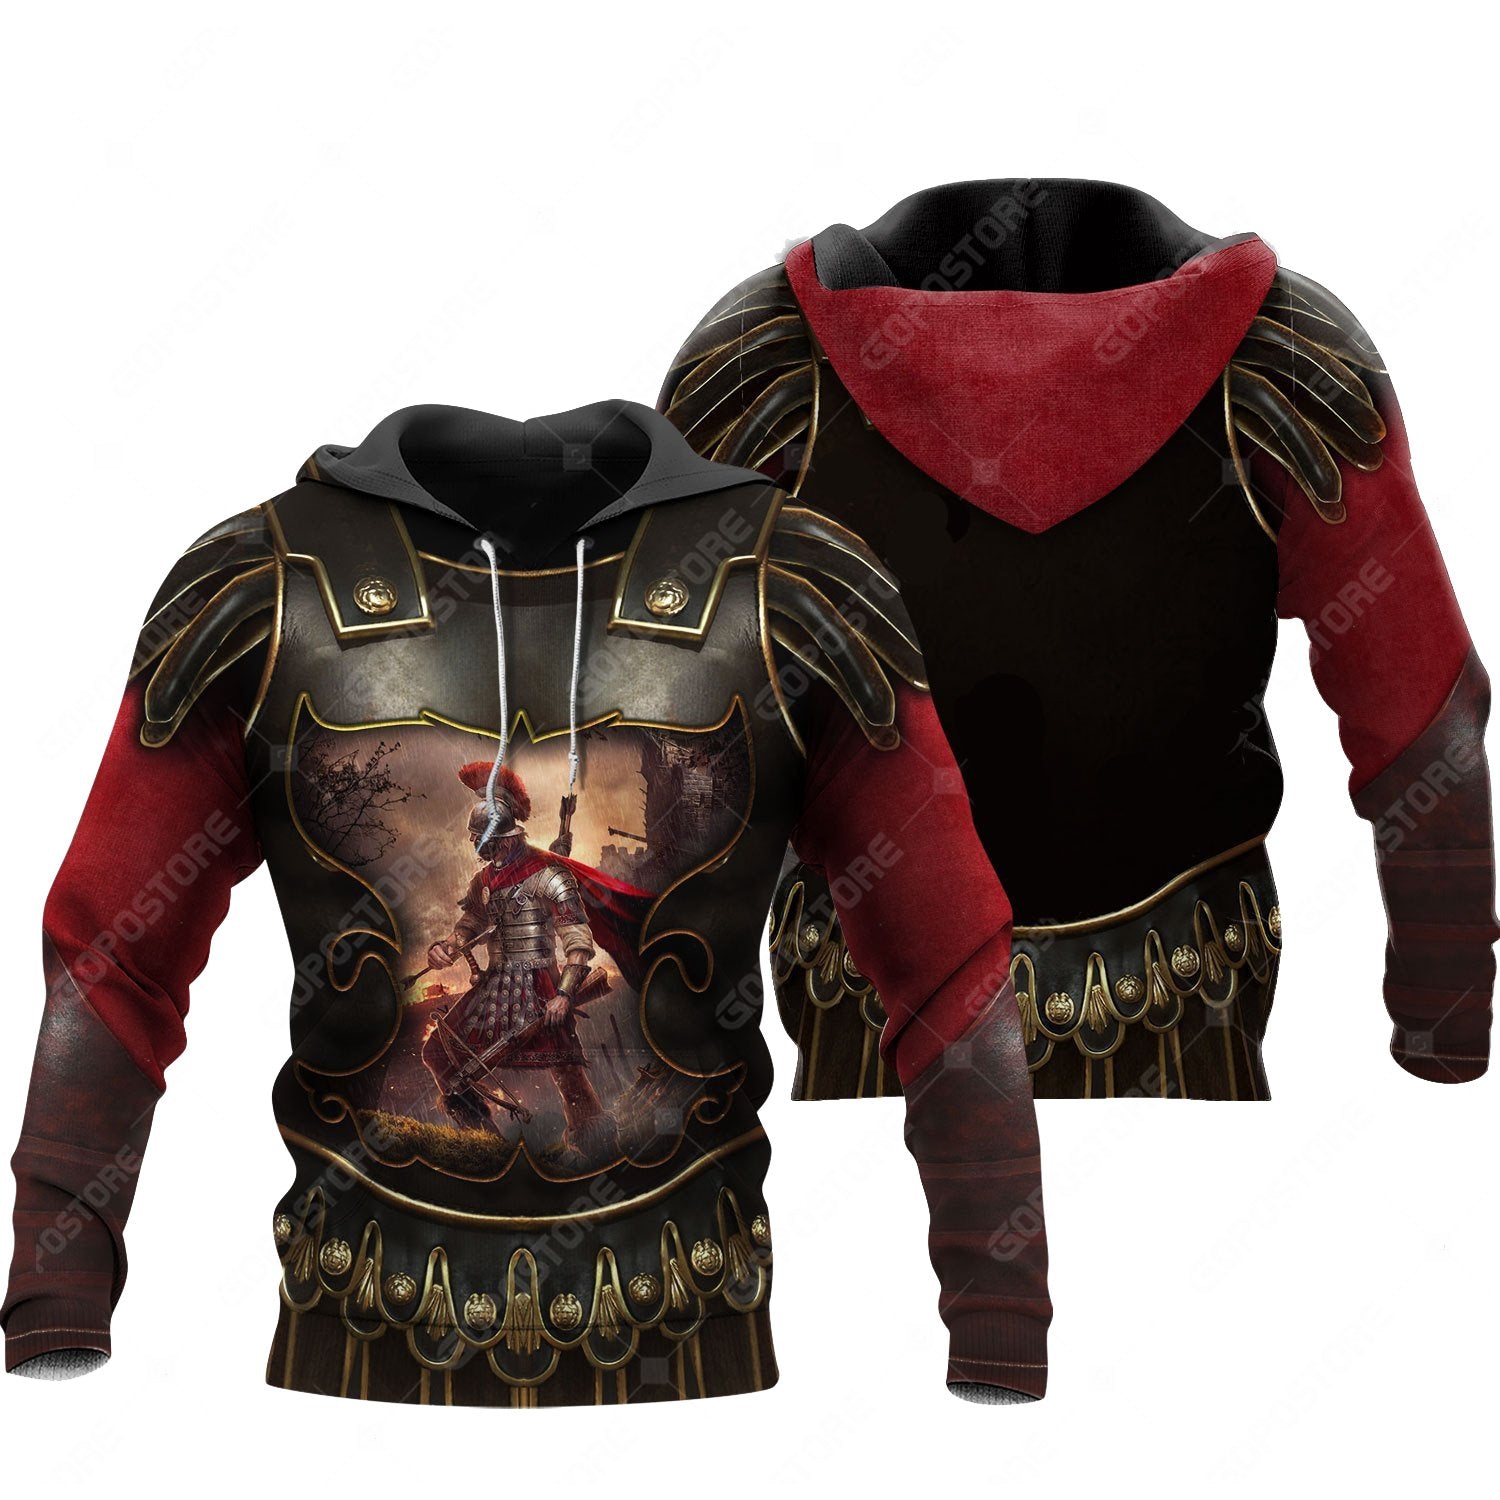 Beautiful Armour Spartan 3D All Over Printed Shirts MP978 - Amaze Style™-Apparel